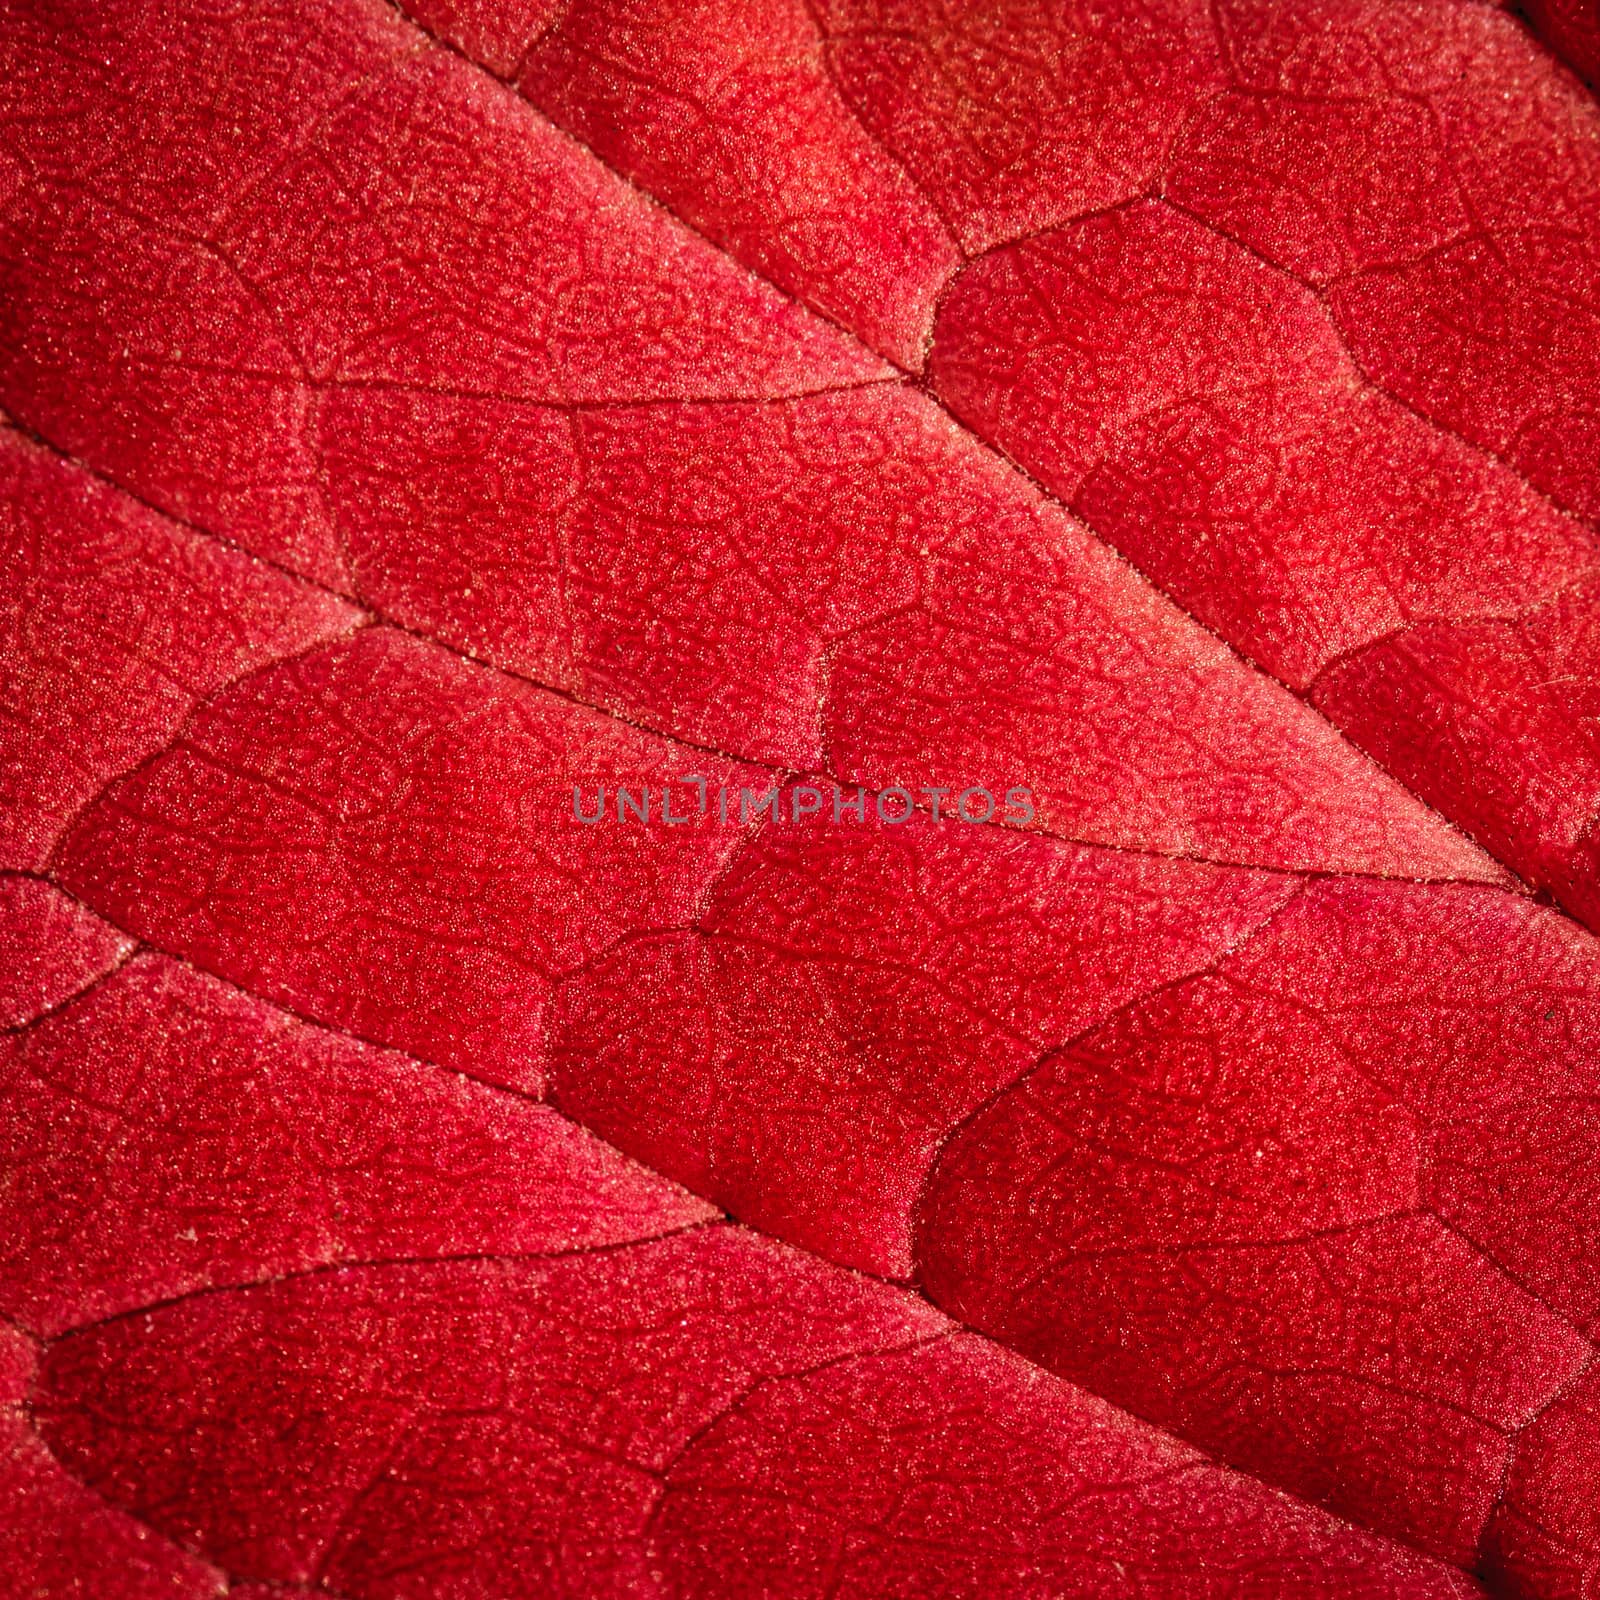 red leaves background, textures